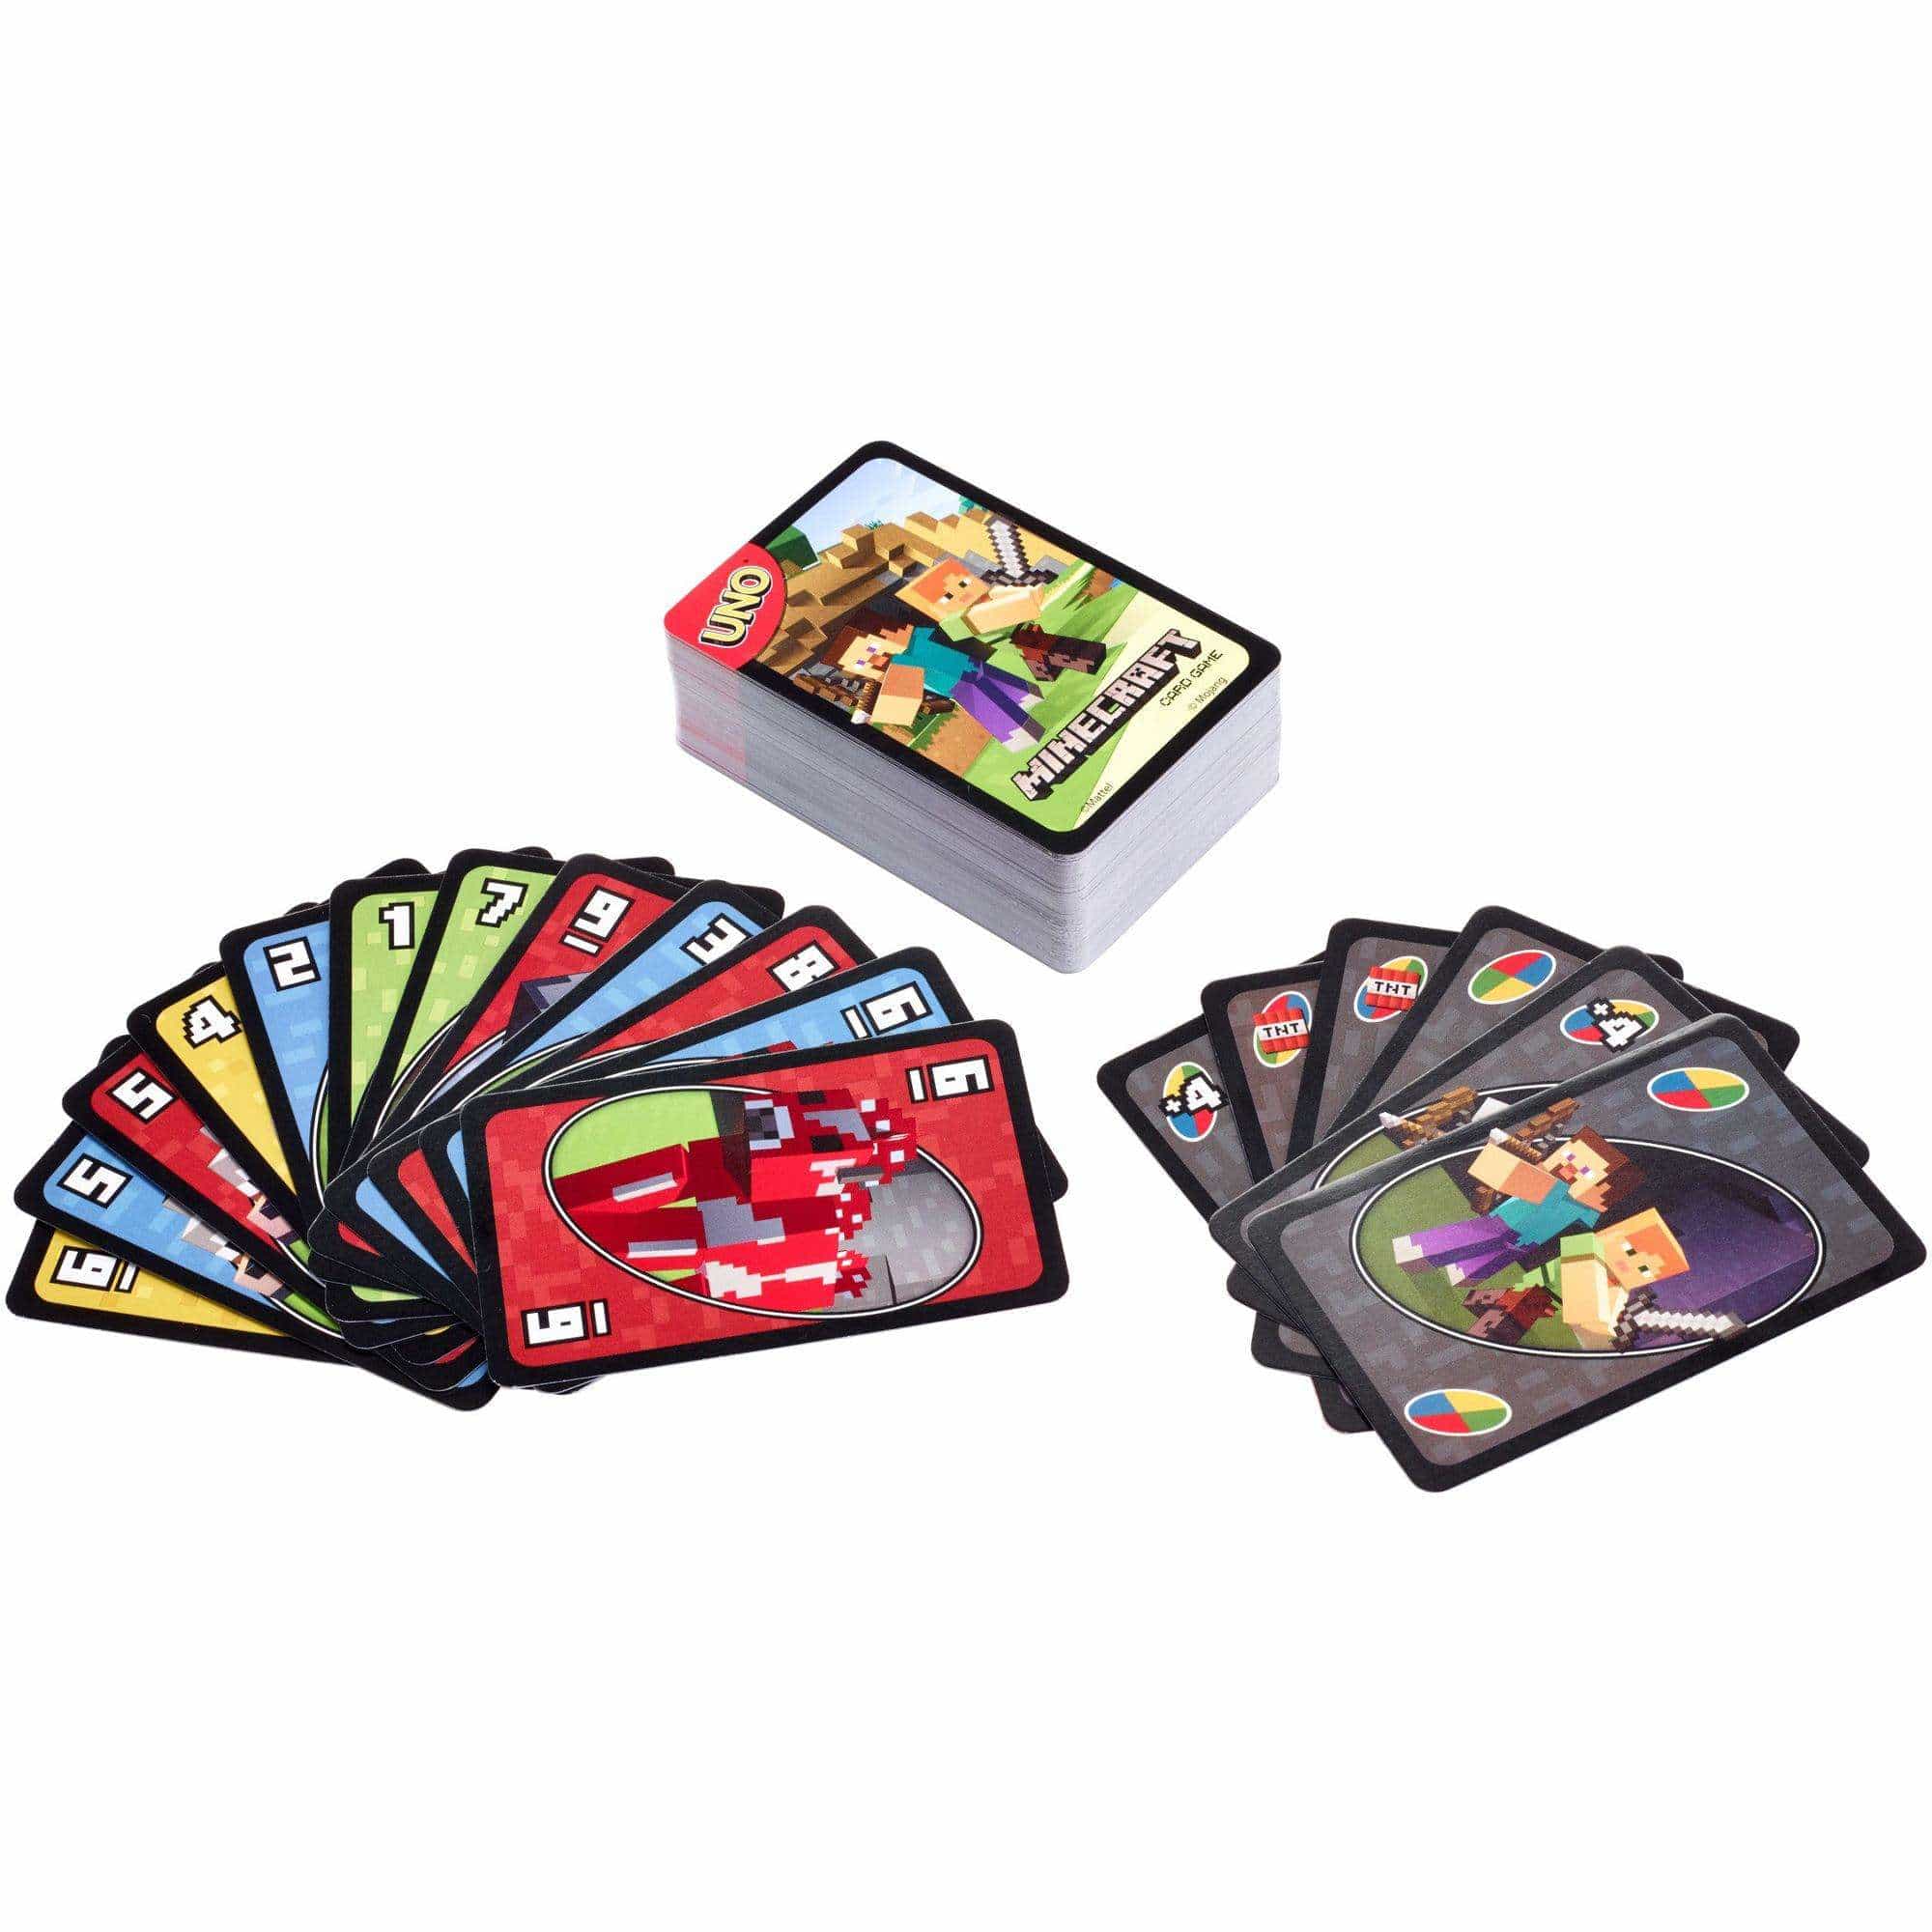 Mattel-UNO Card Game - Minecraft-FPD61-Legacy Toys